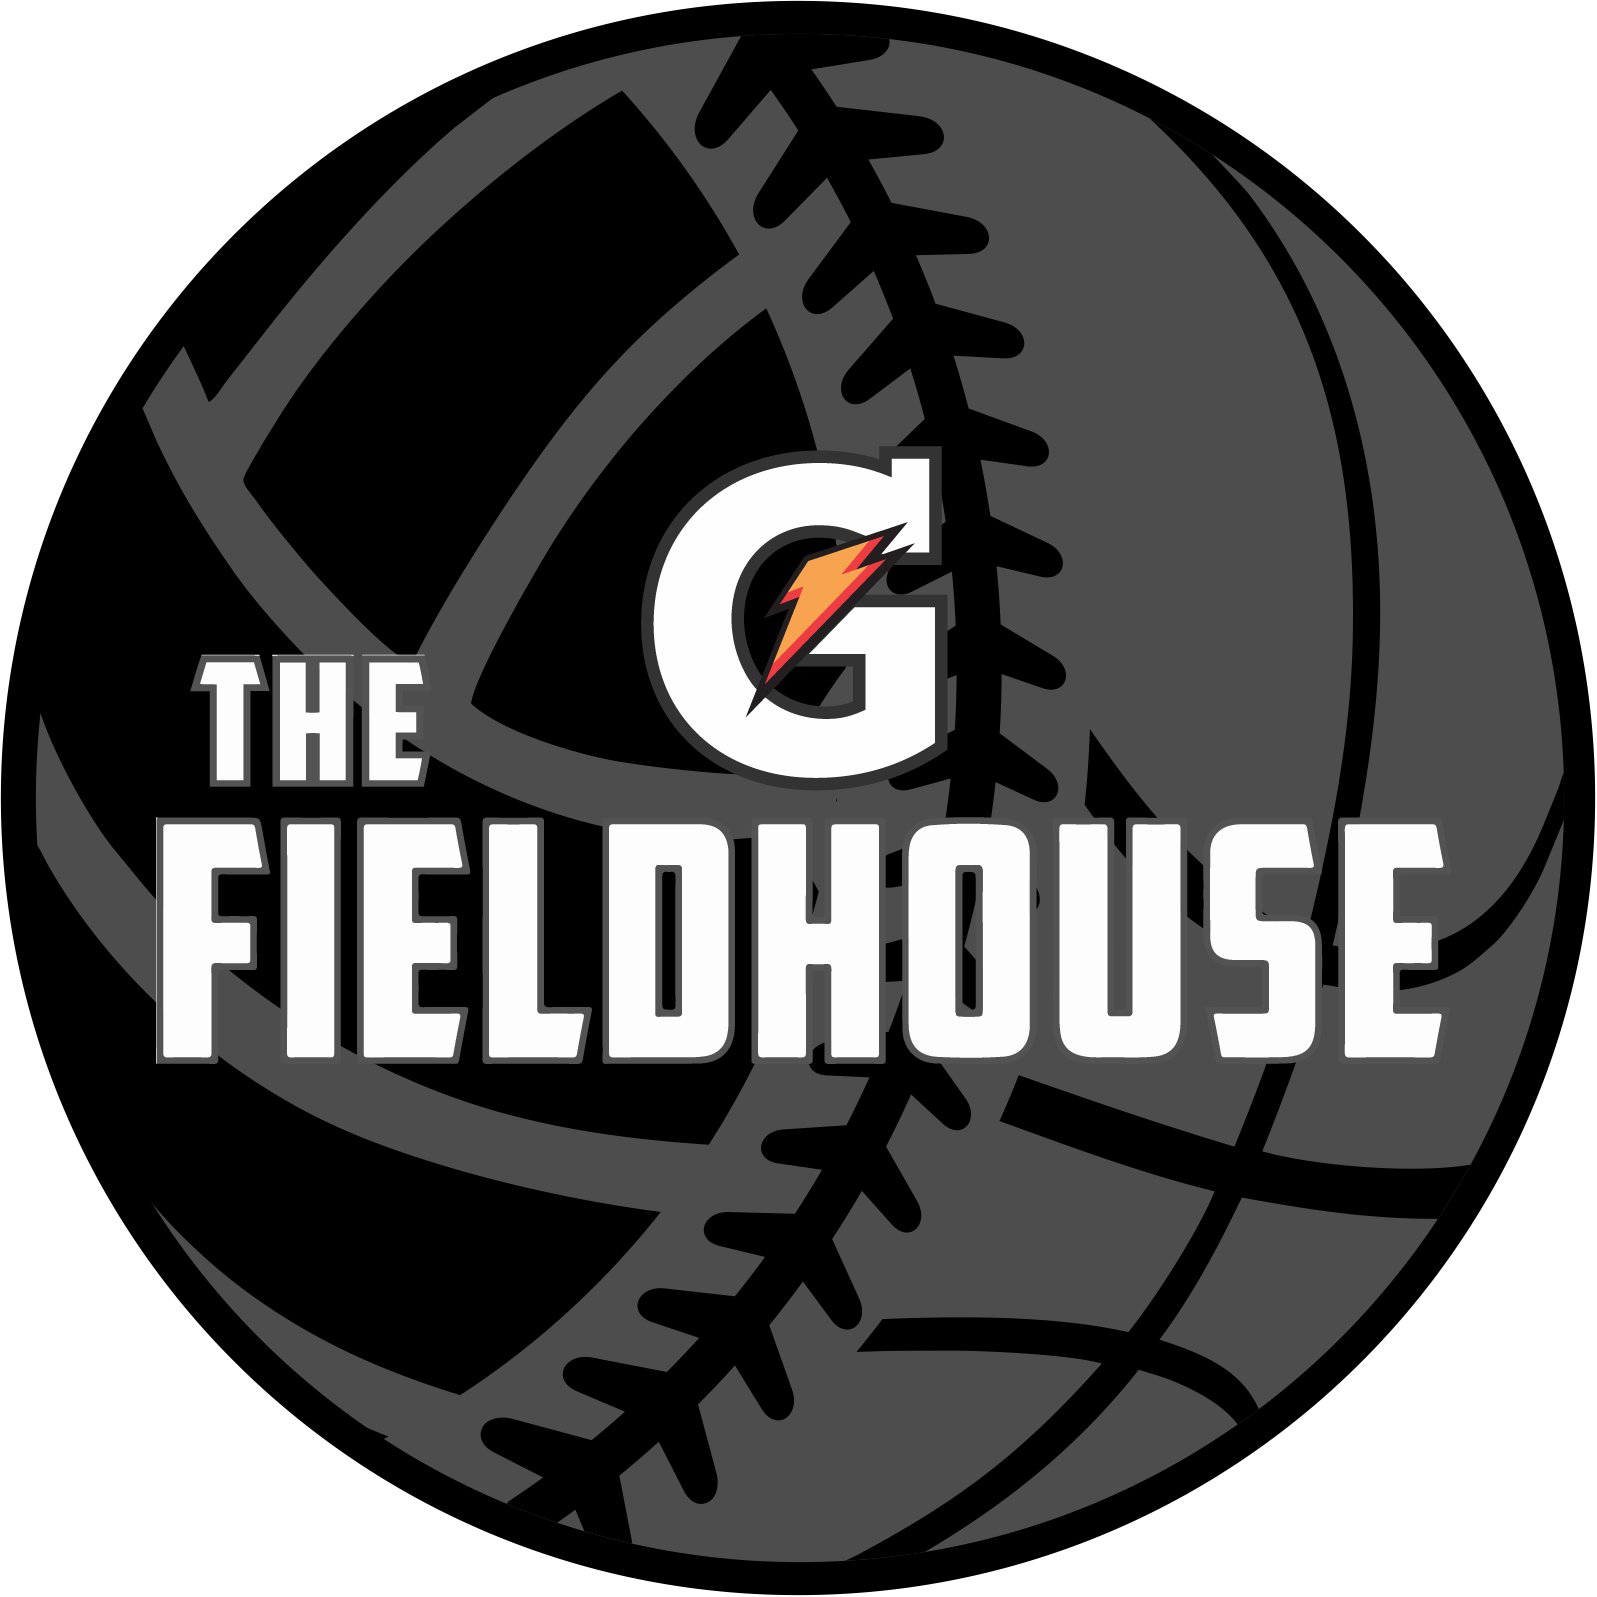 The Gatorade Fieldhouse | The Place for Ballers